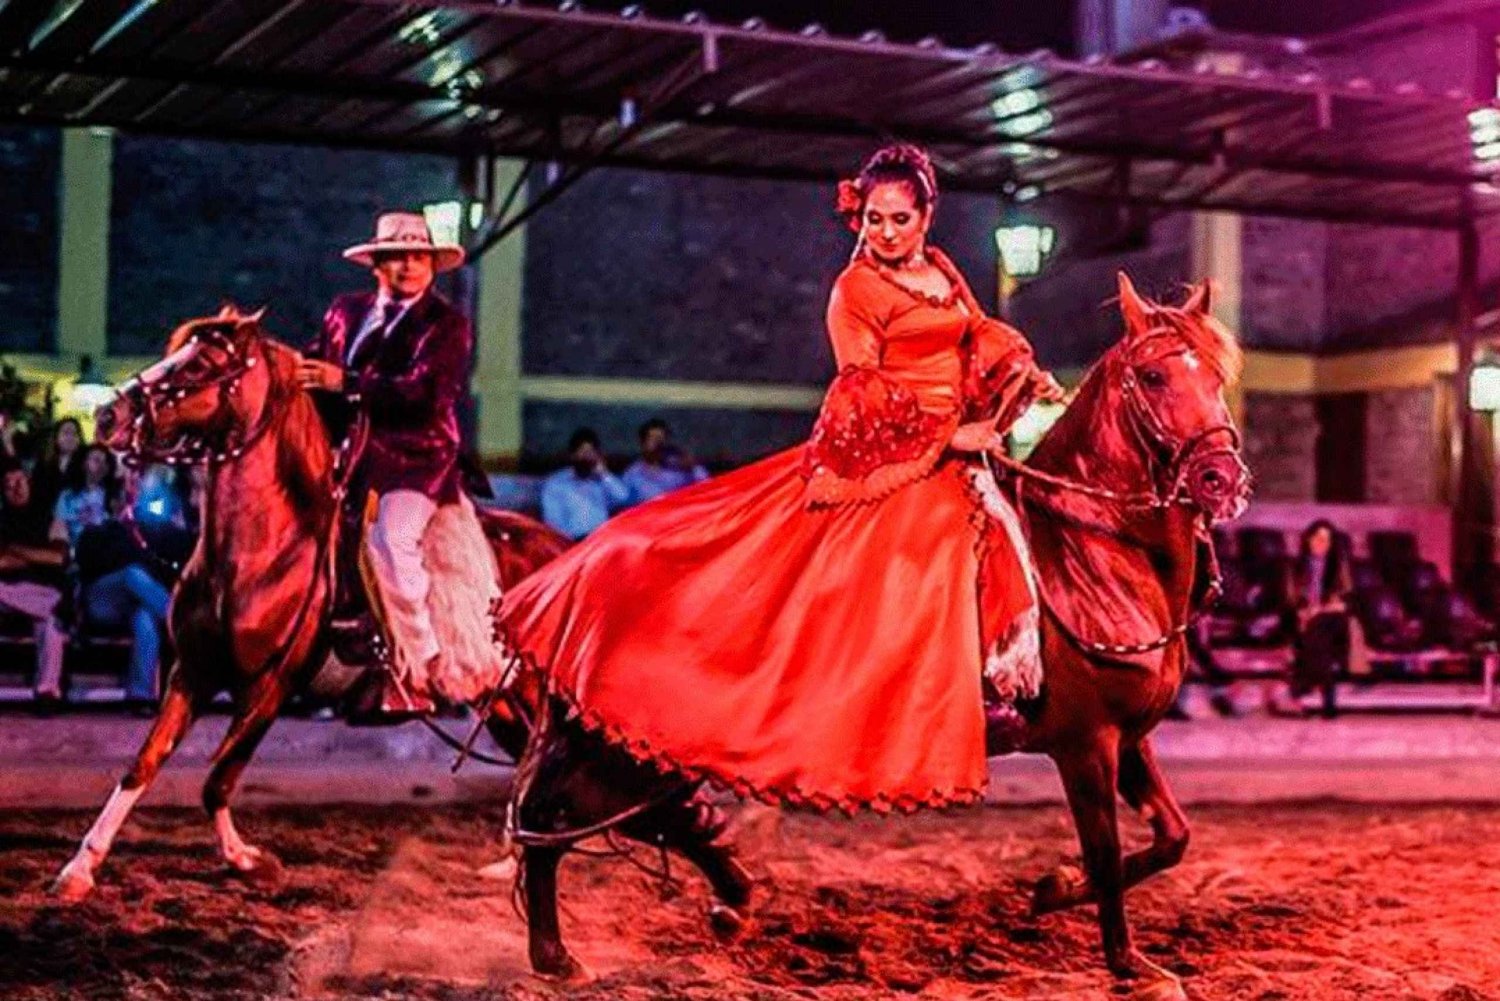 Lima: Diner & paso paarden show